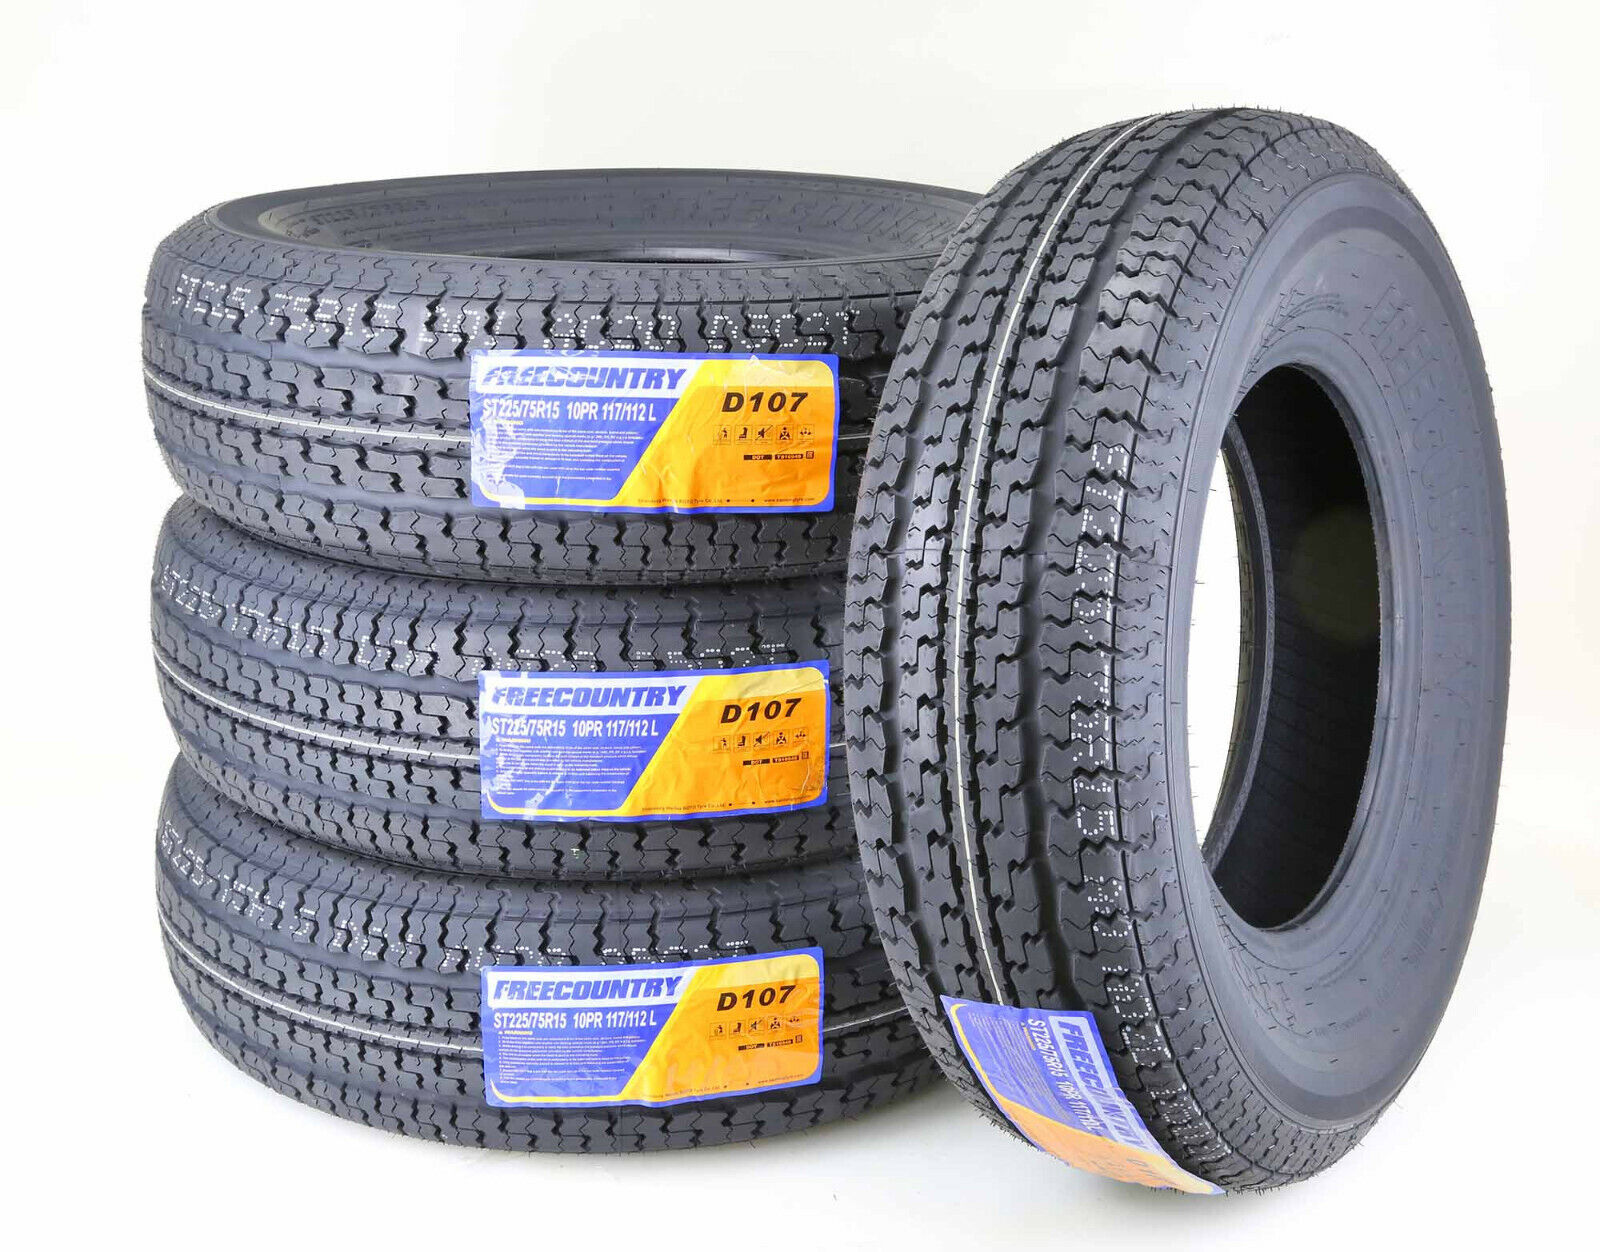 Trailer Tires ST225/75R15 Free Country Radial 10 Ply LR E w/Scuff Guard - Set 4